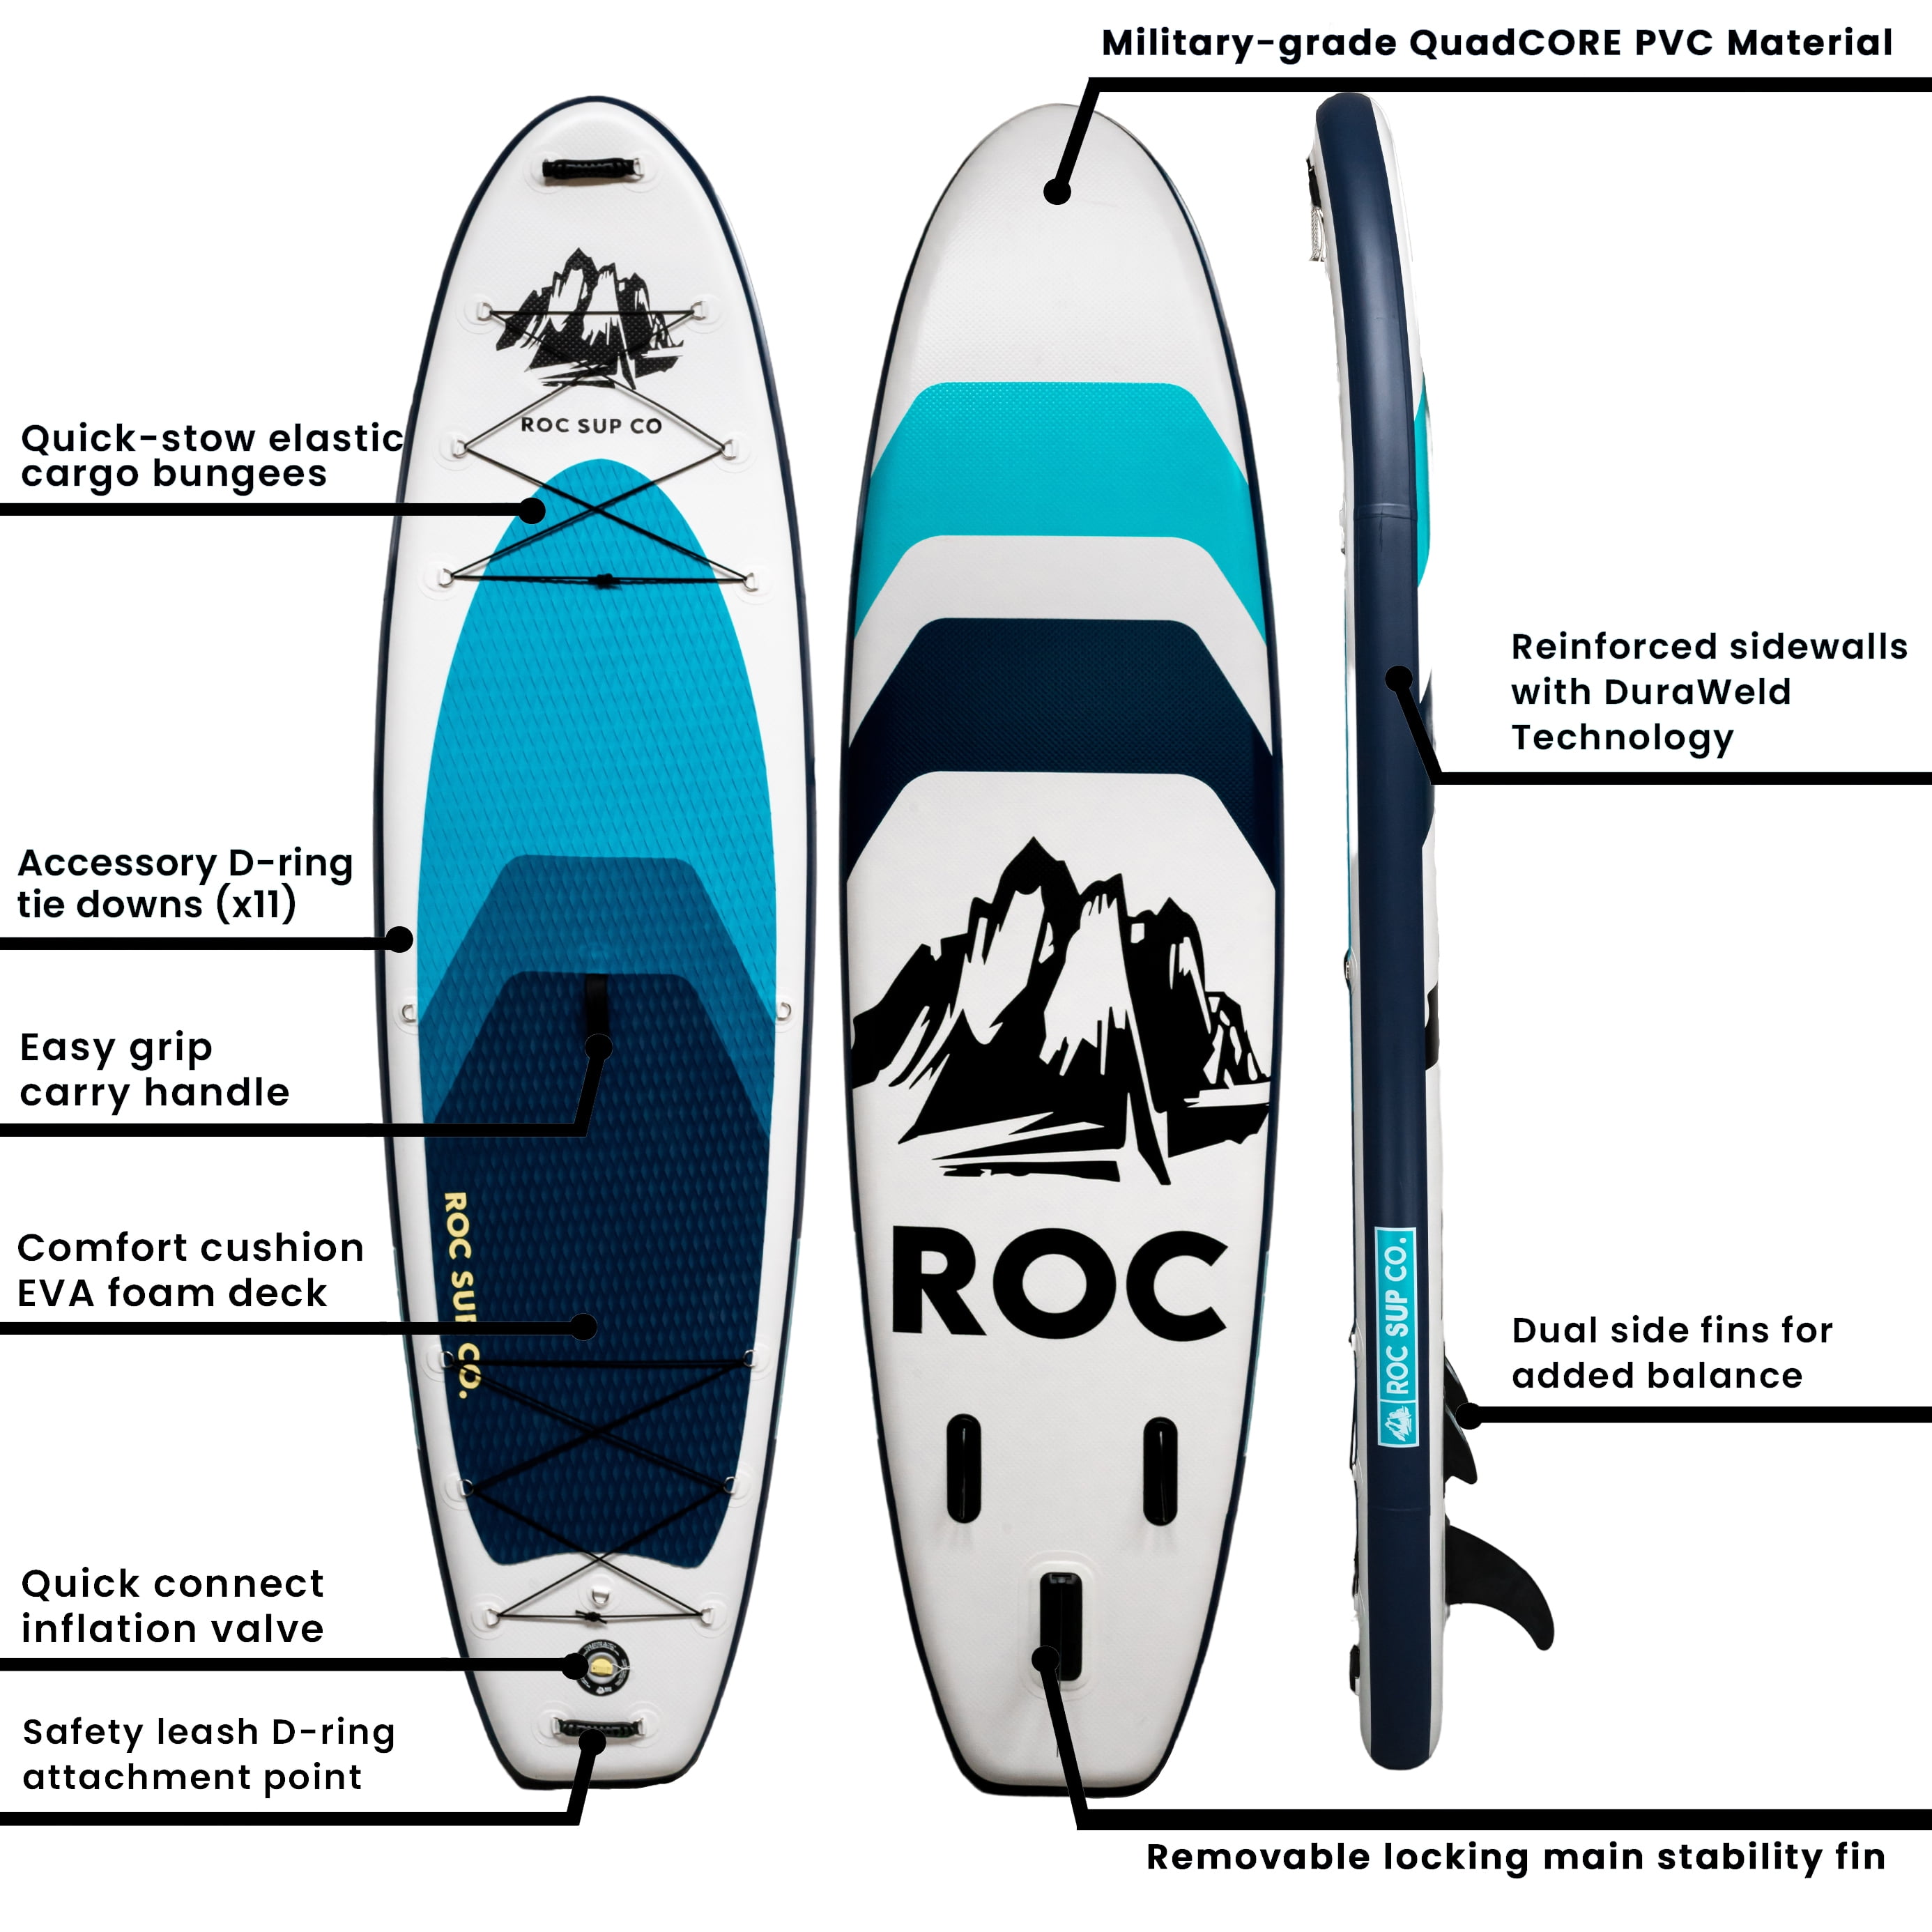 Roc Inflatable Stand Up Paddle Board with Premium sup